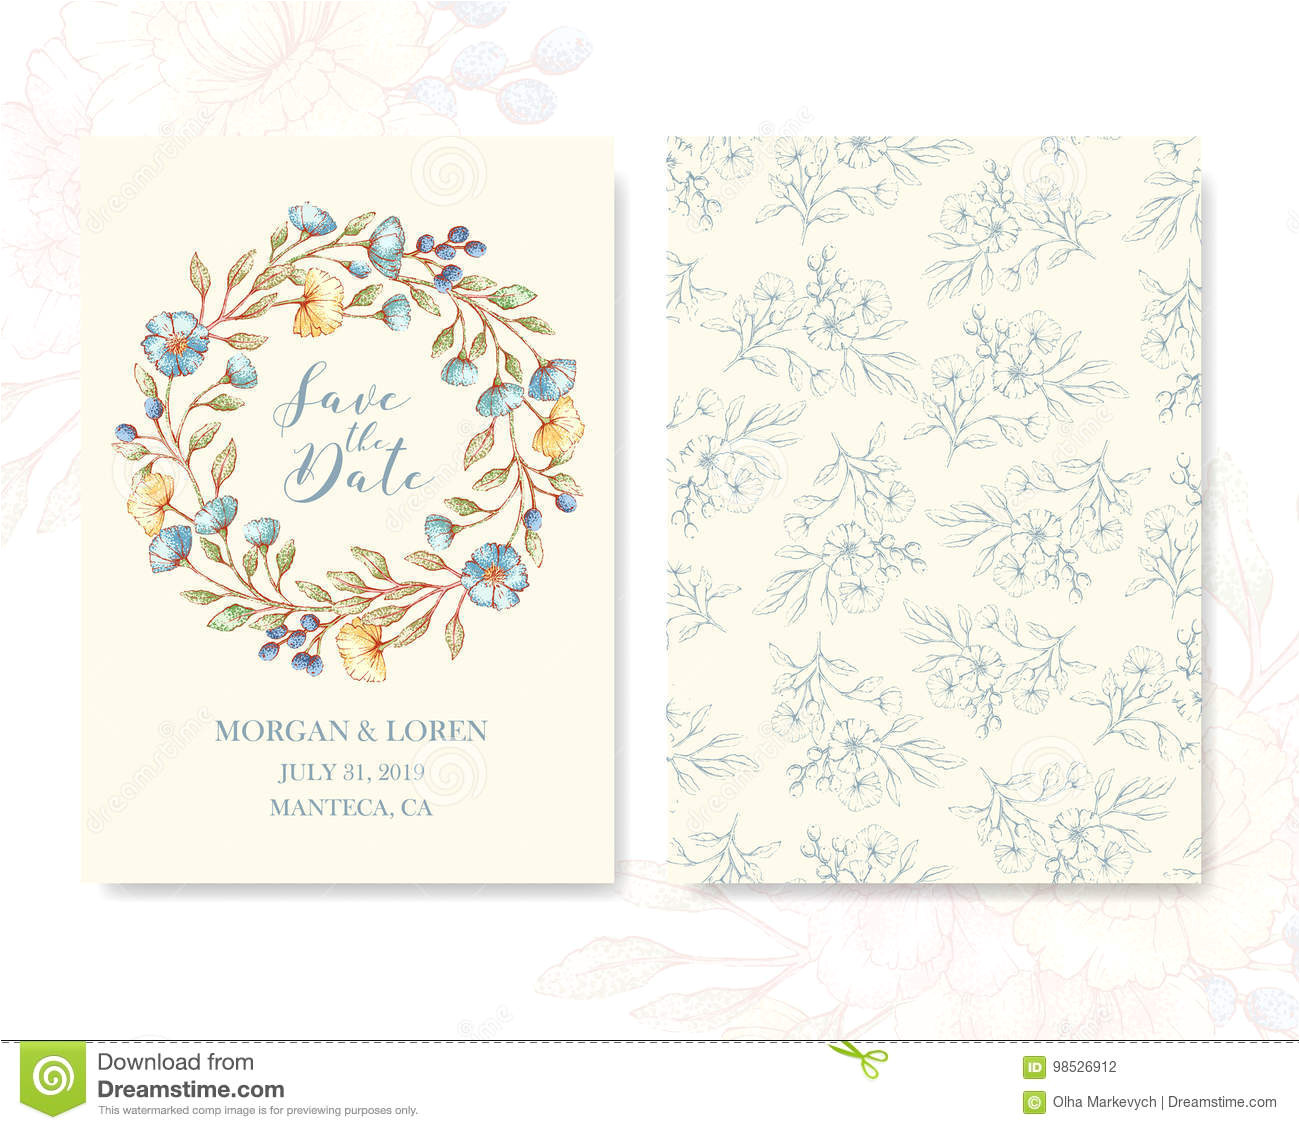 greeting cards template vector card pastel vintage style floral frame can be used greetings wedding birthday valentine 98526912 jpg